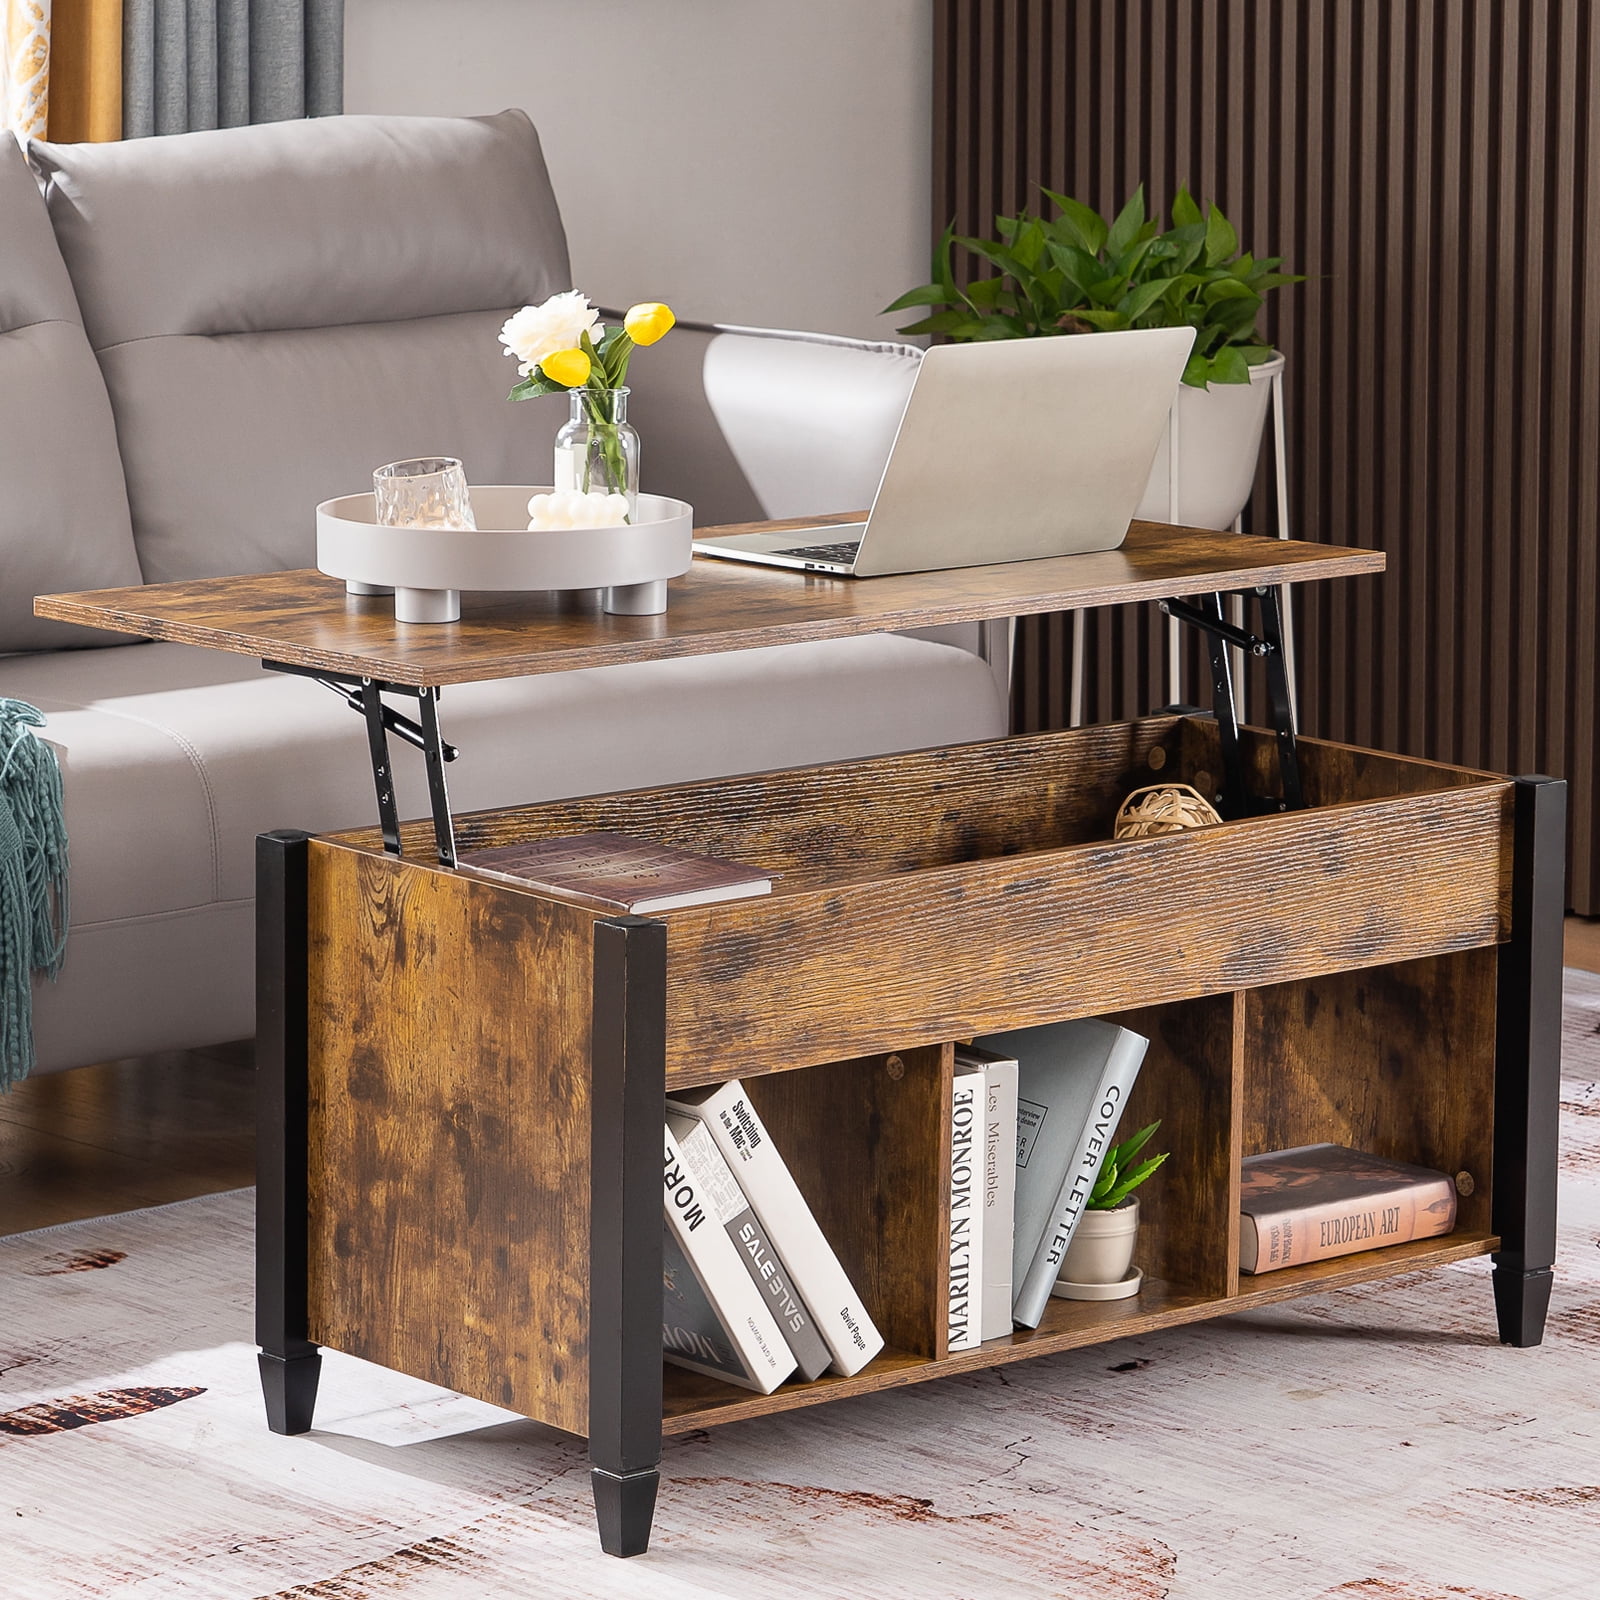 Ktaxon Lift Top Coffee End Table Storage Space Home Furniture,with Storage & Shelf Modern Occasional Table Rostic Brown